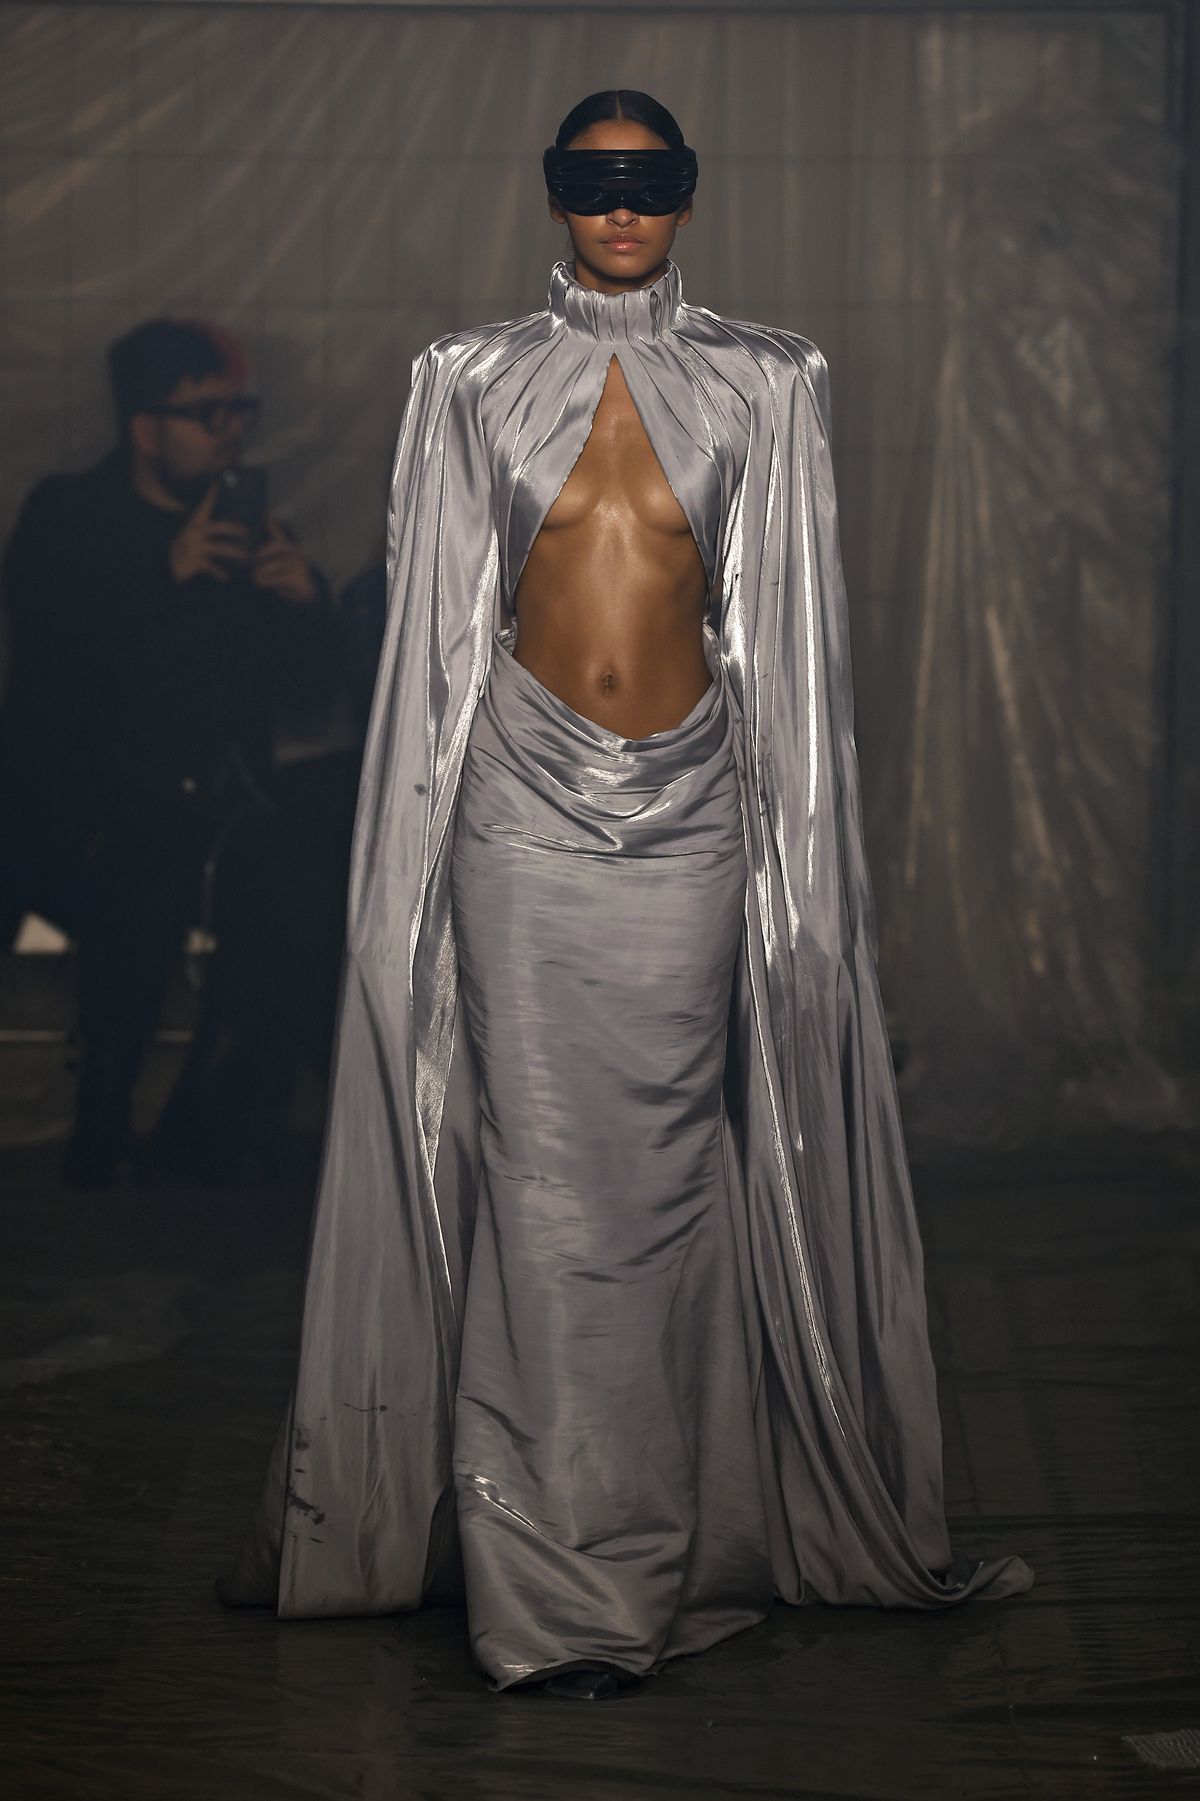 A model wearing a flowing gray dress with her midriff exposed walks the runway at the Han Kjobenhavn fashion show at Milan Fashion Week.